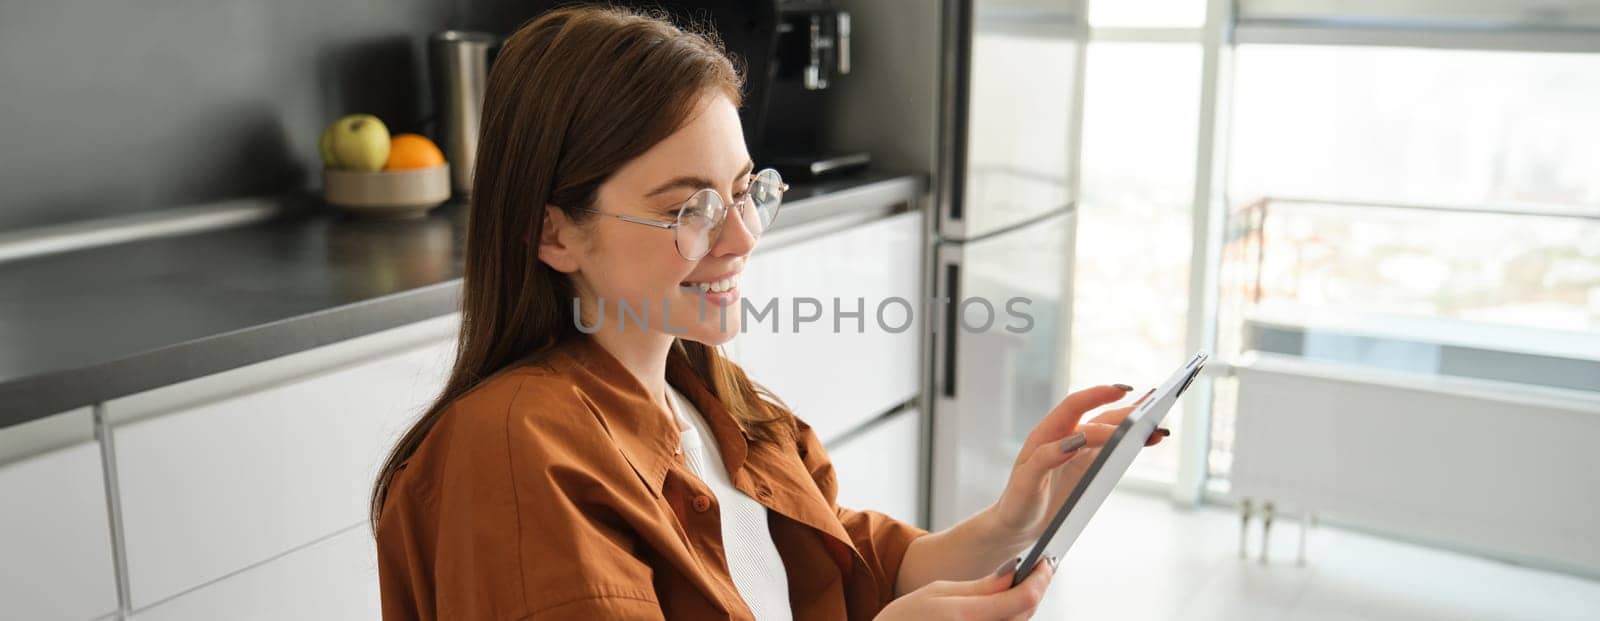 Side view of young woman in glasses, beautiful girl reading on digital tablet, messaging, online shopping with gadget, smiling, sitting in kitchen at home.